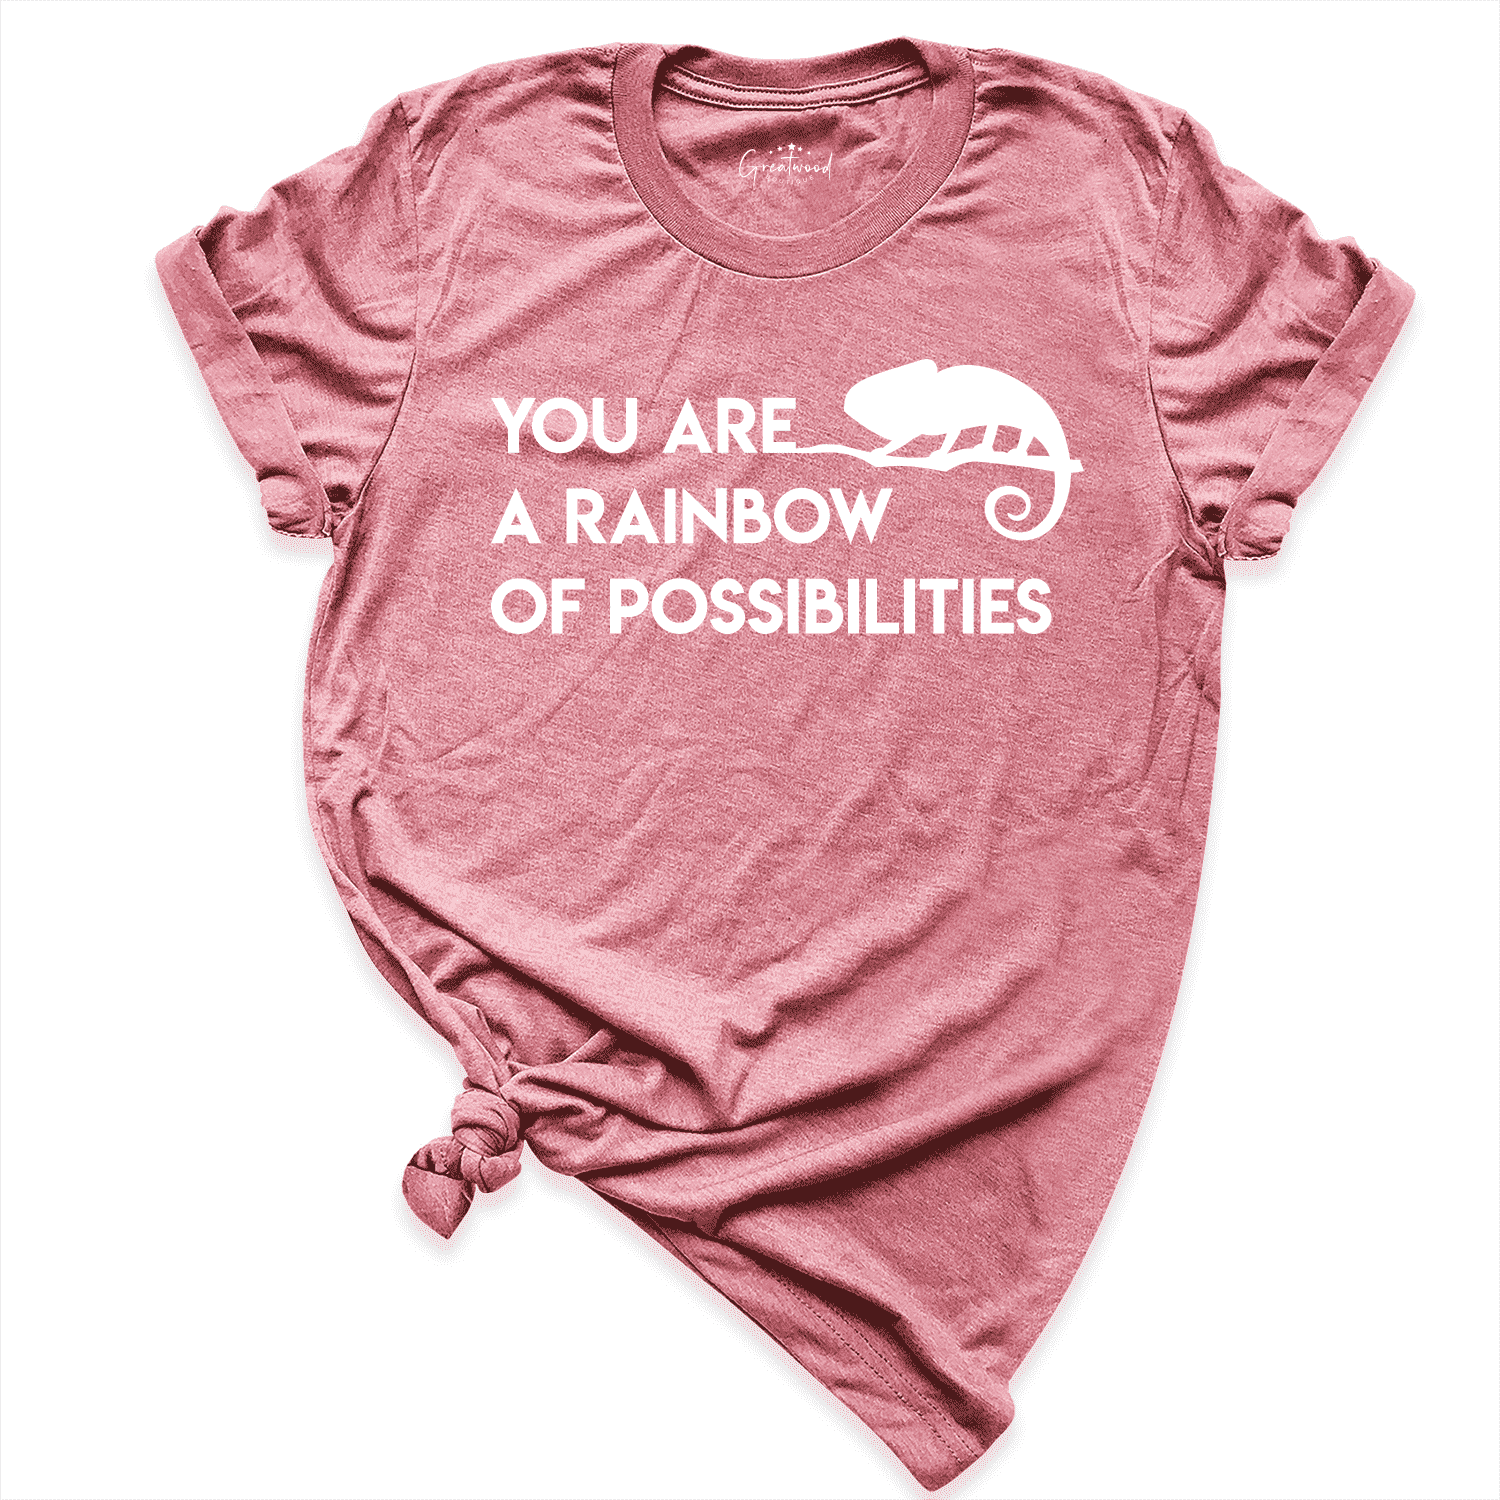 You Are a Rainbow Of Possibilities Shirt Mauve - Greatwood Boutique